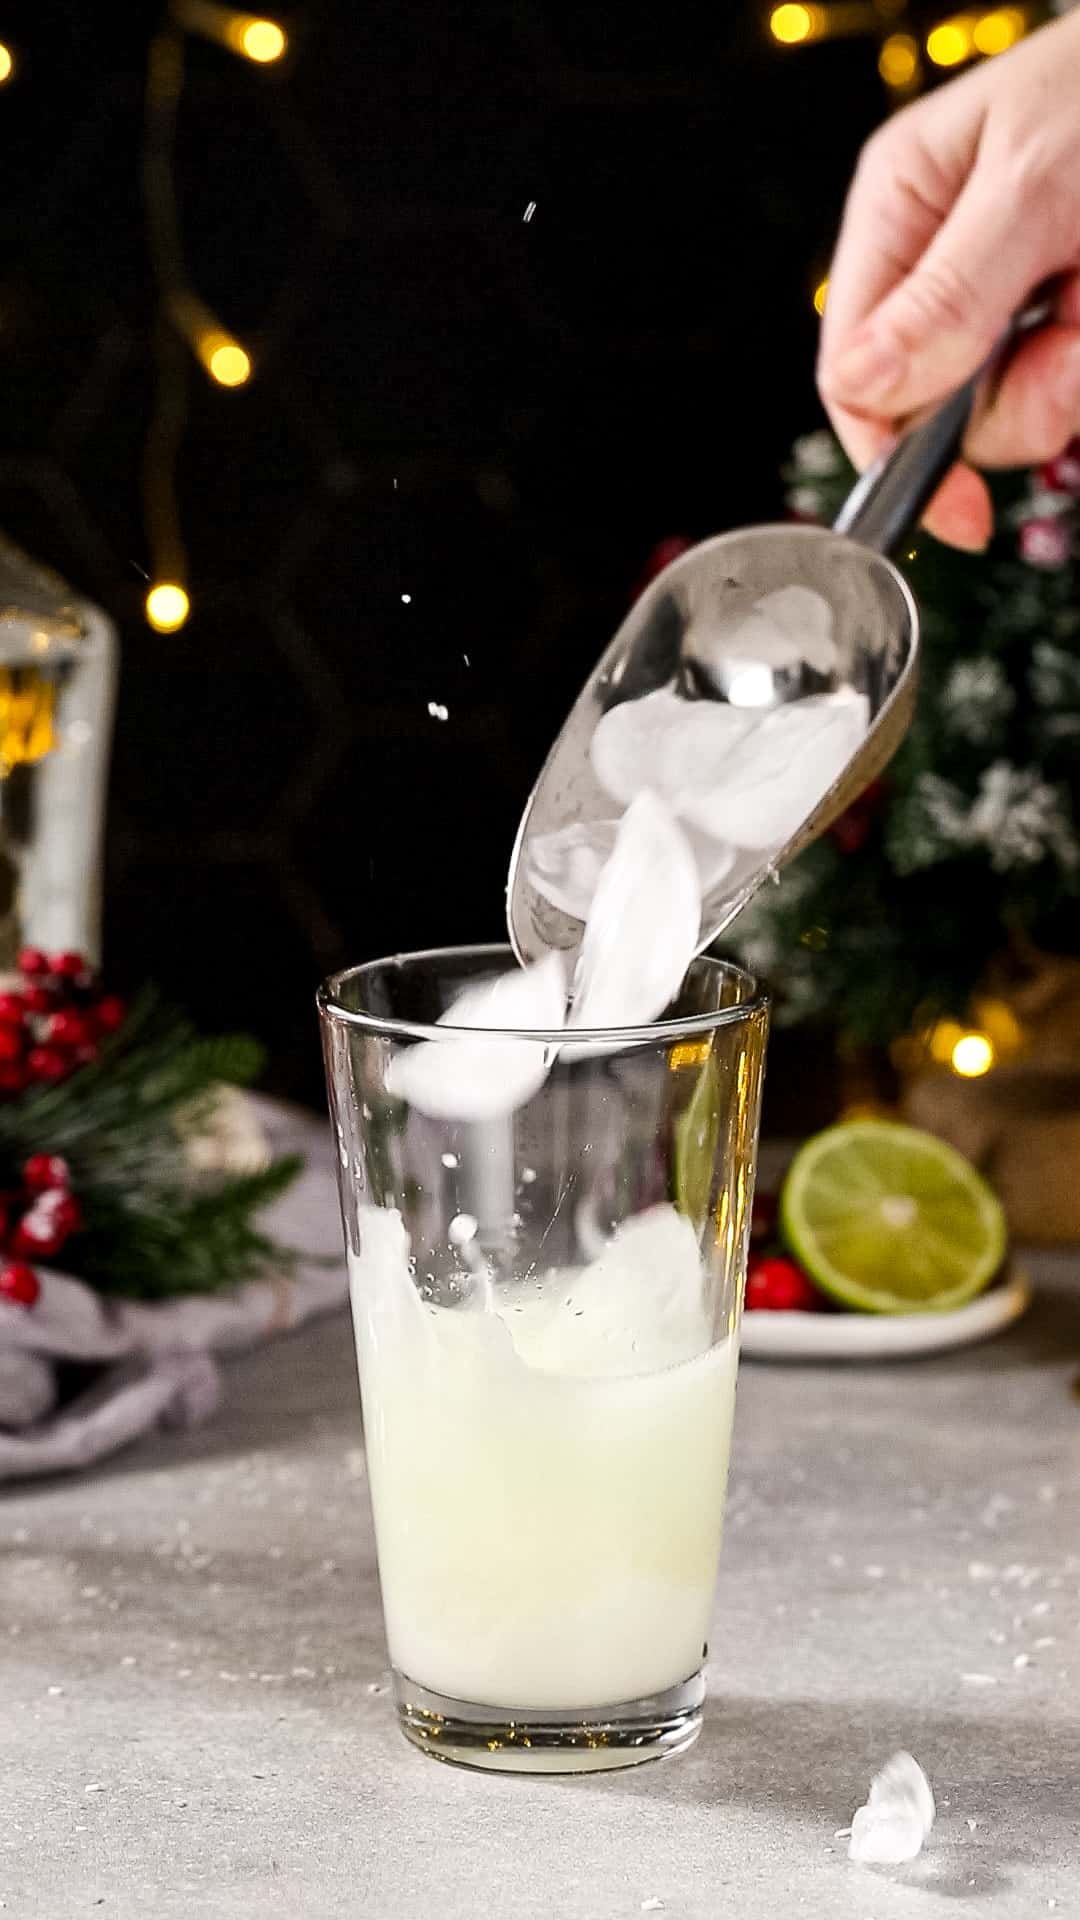 Hand using a silver ice scoop to add ice to a glass cocktail shaker filled with white liquid.